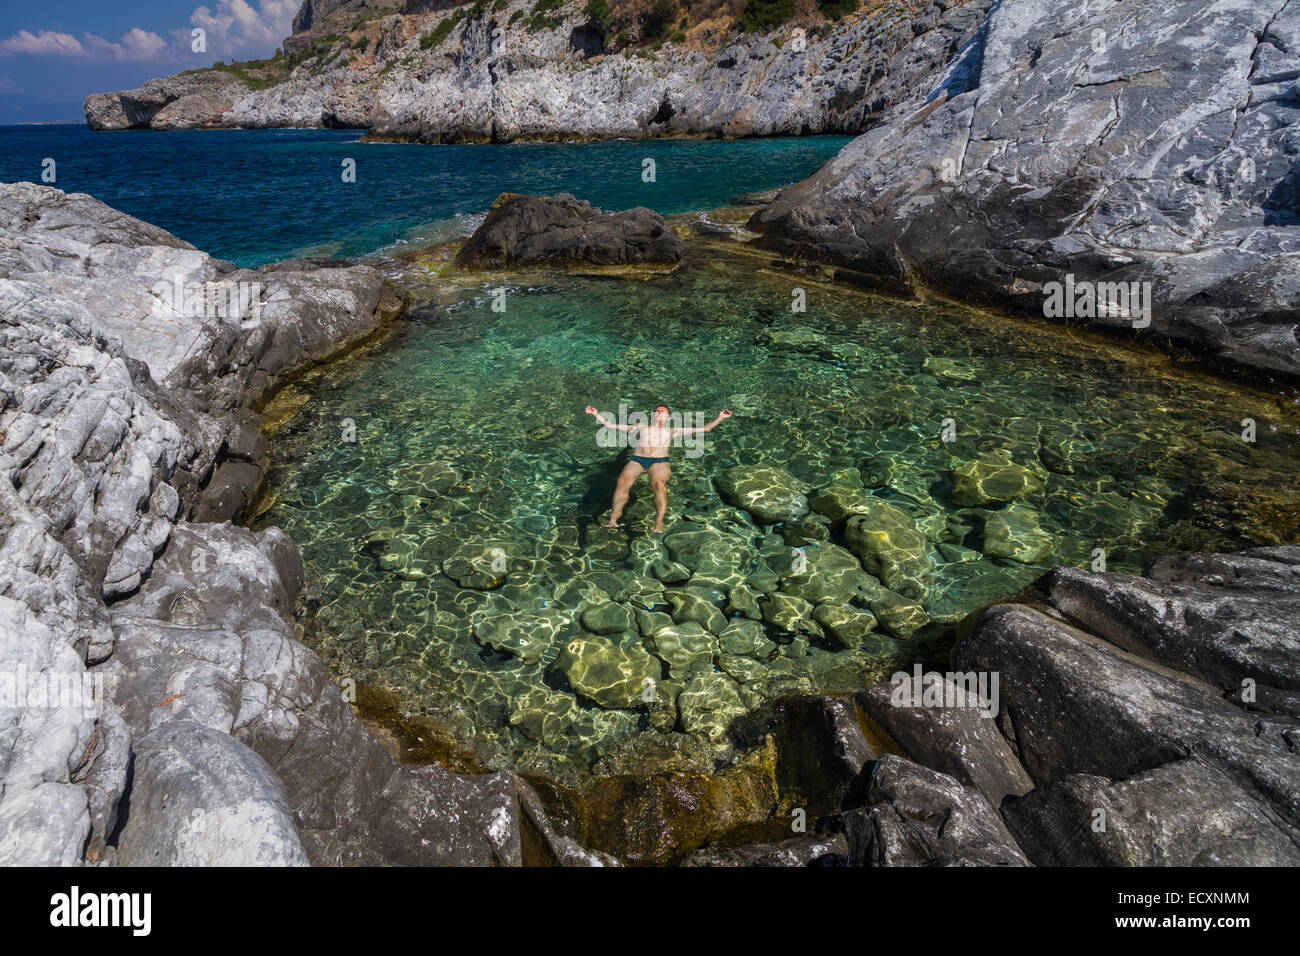 A man relaxing on the water of a natural pool with sea water. Trachila village, Messenia, Greece Stock Photo